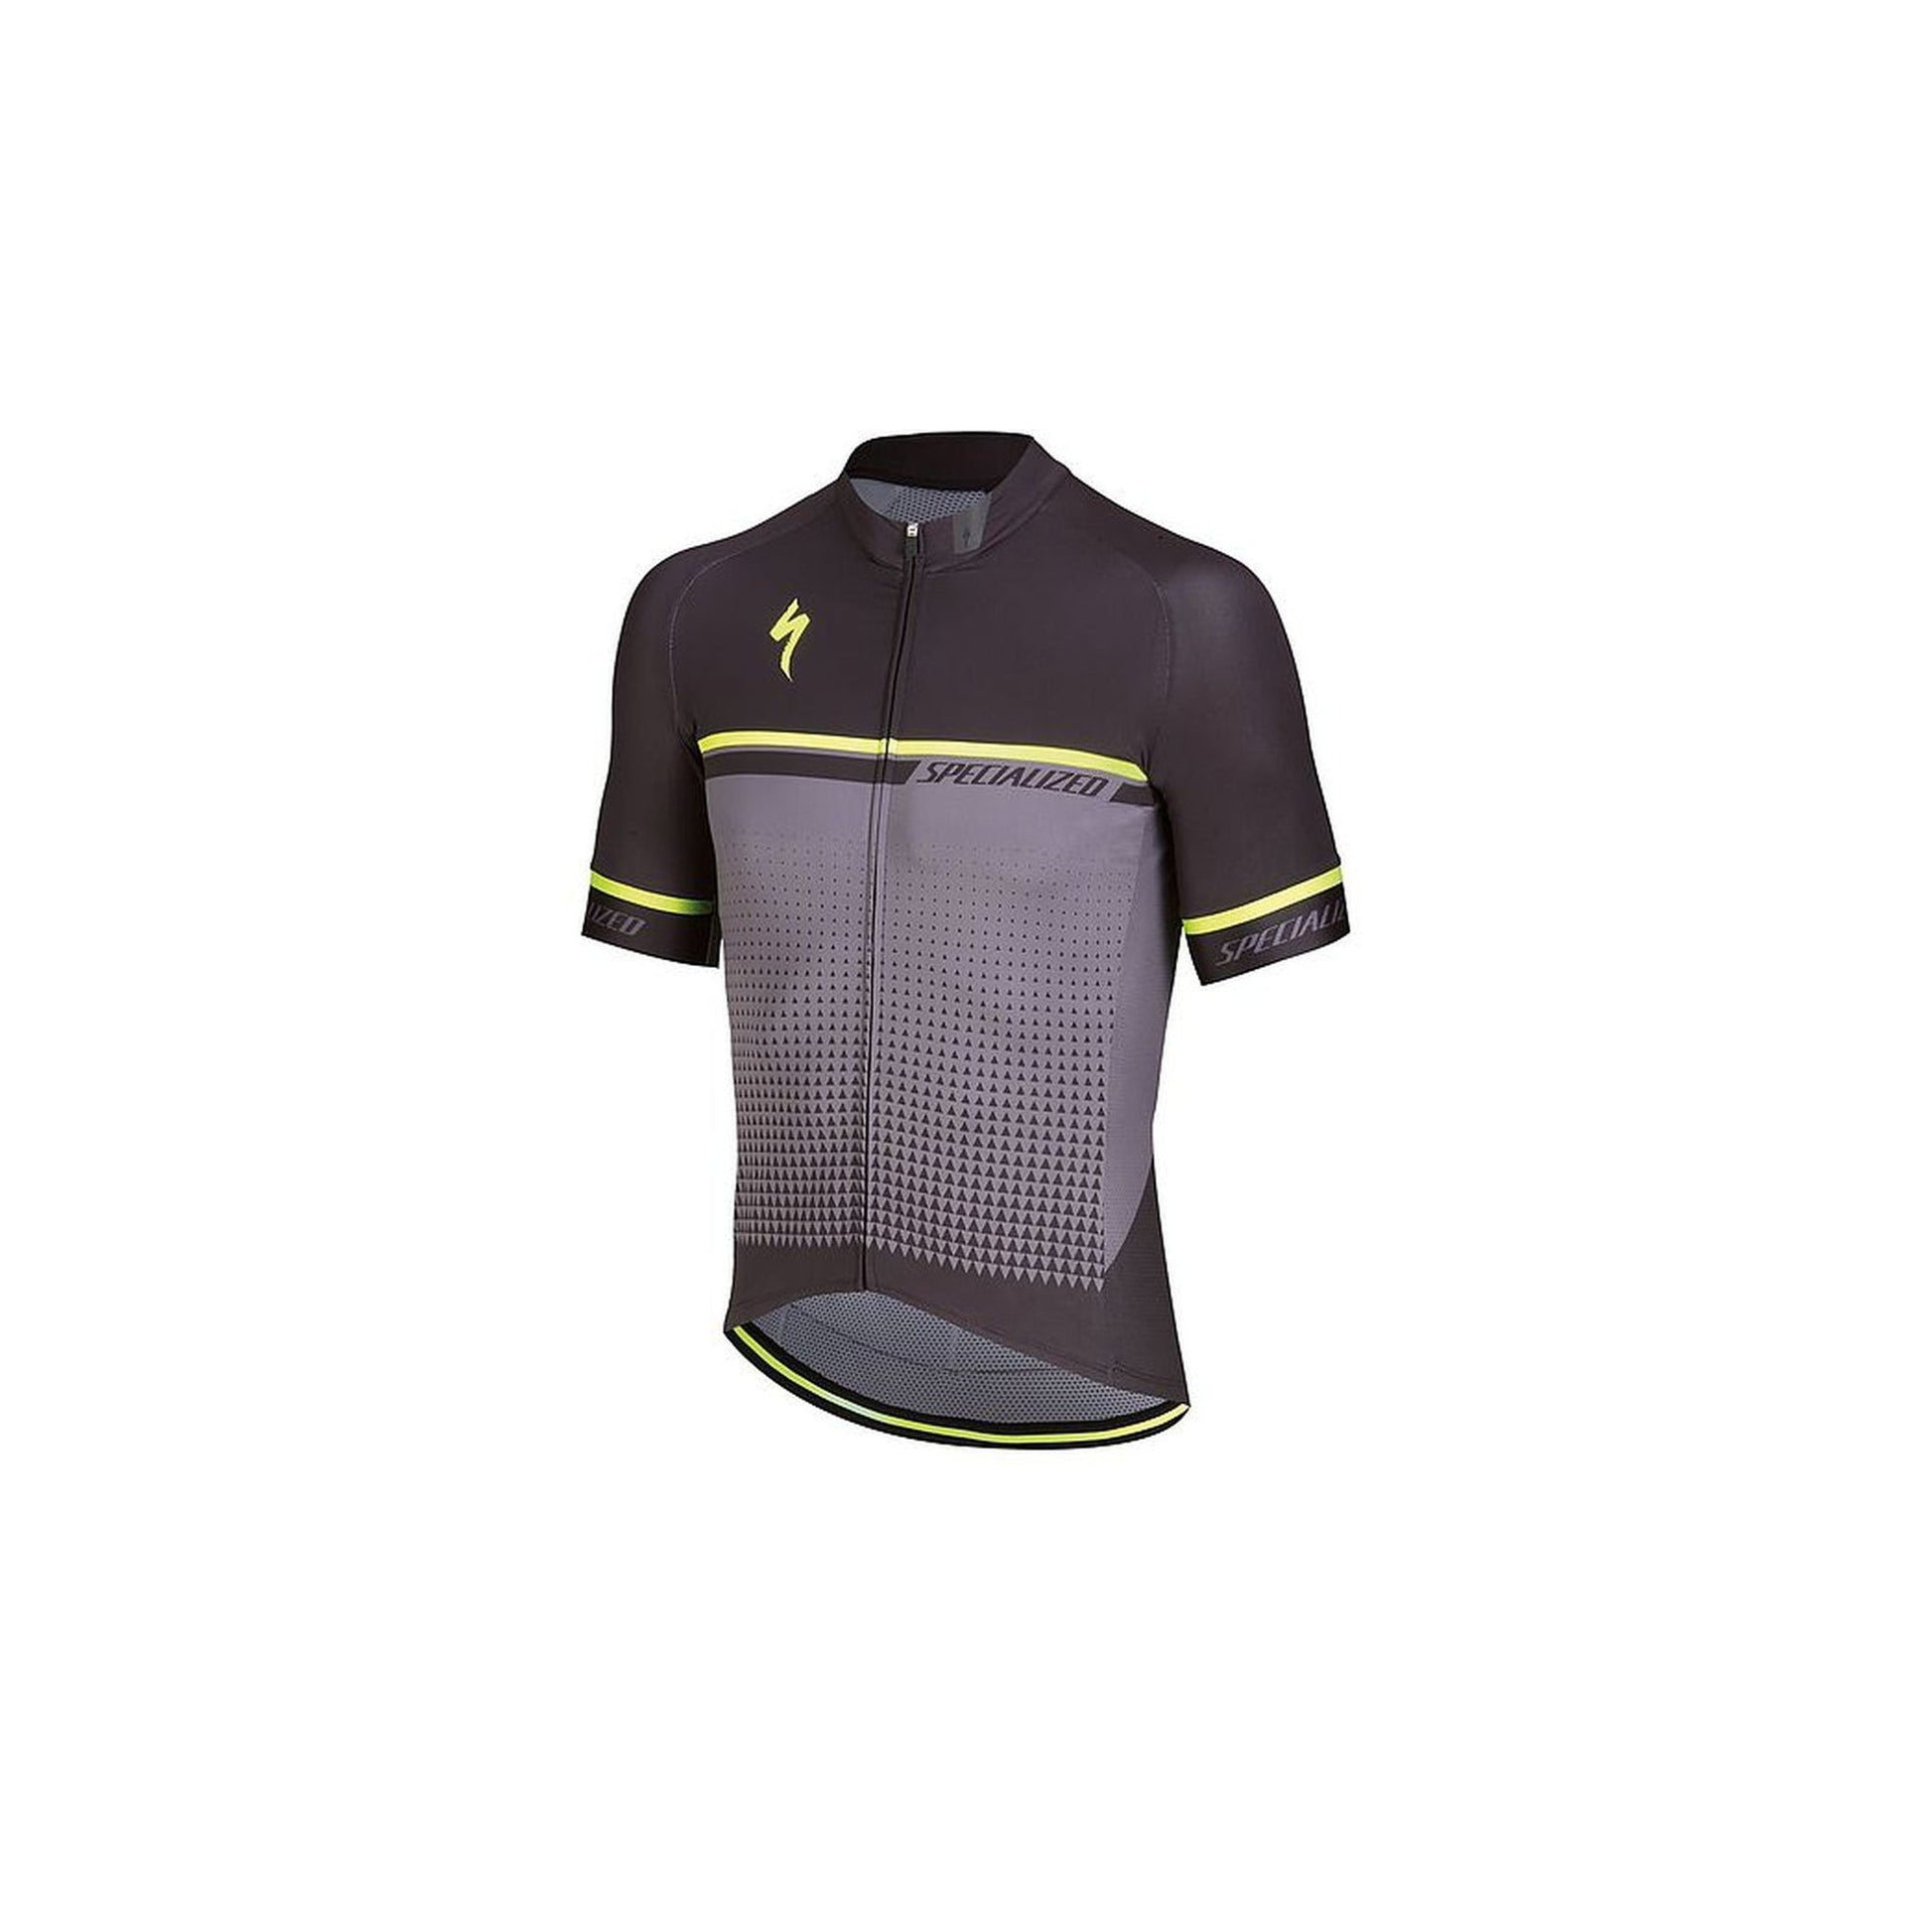 SL Expert SS Jersey-Cycles Direct Specialized